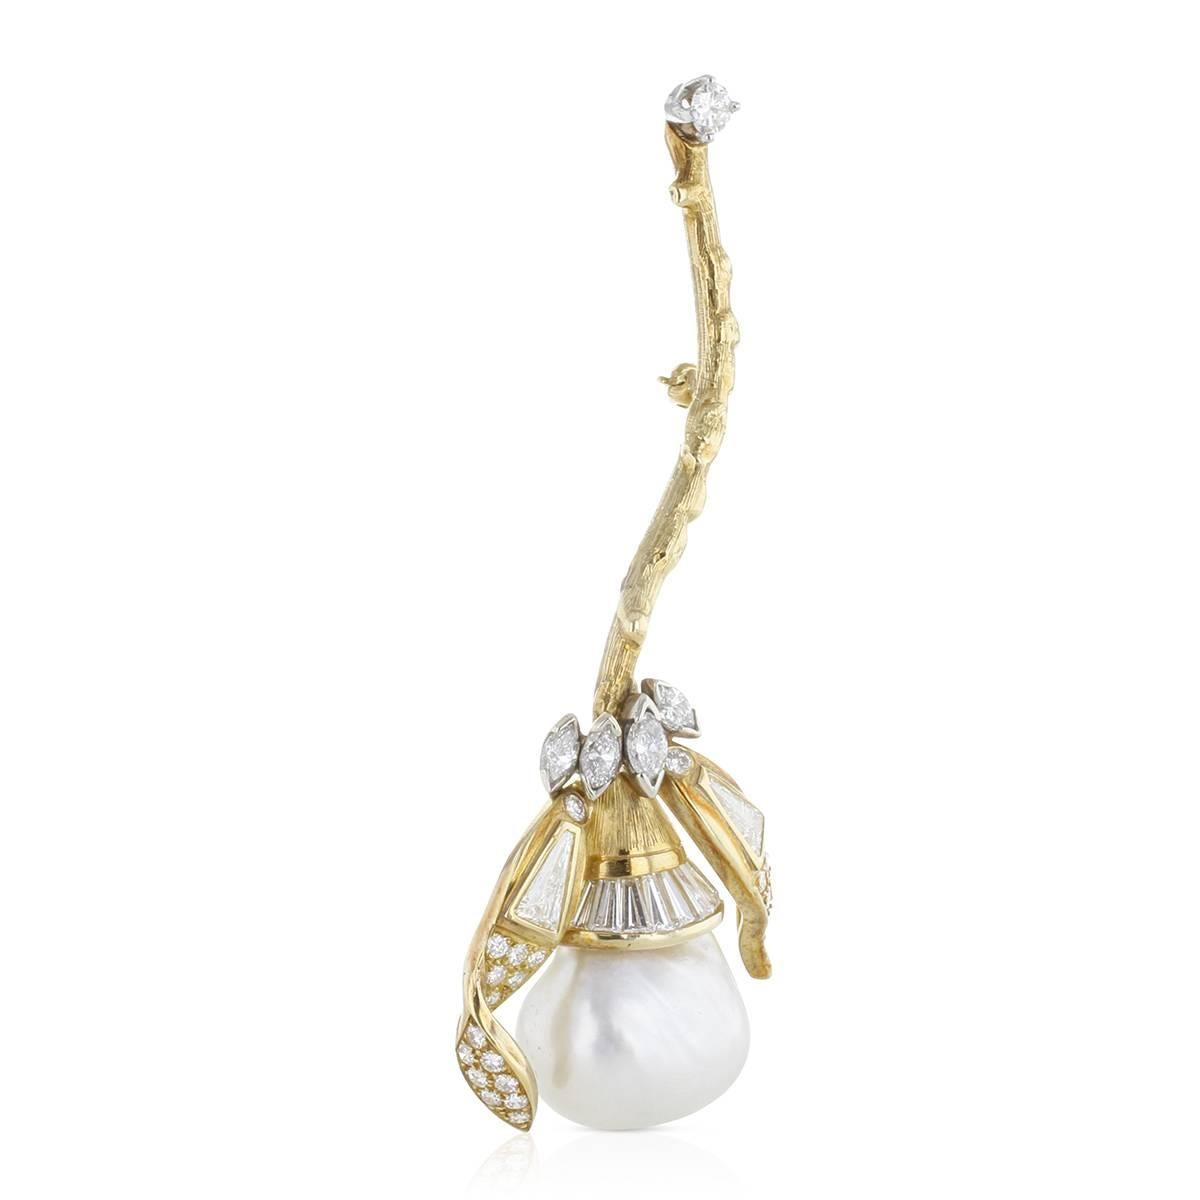 This bold and beautiful mid-20th-century vintage flower natural pearl brooch shimmers with large trilliant cut diamonds, marquise cuts and round brilliants encrusted and on its stem and petals all set in yellow gold. This breathtaking nature